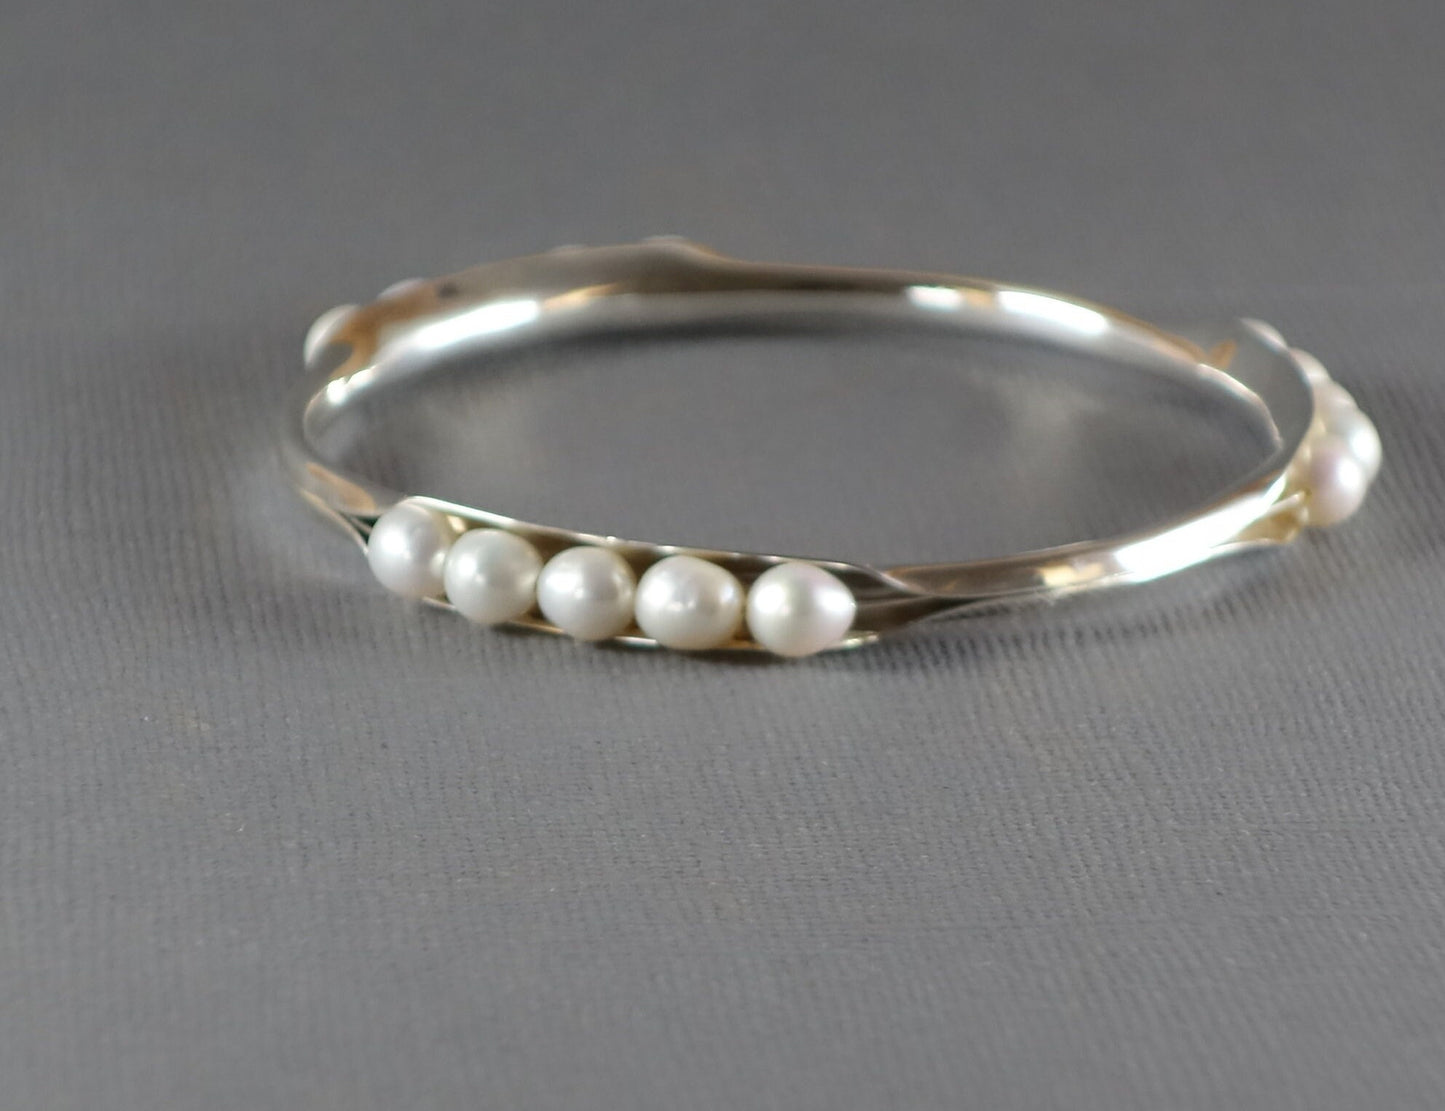 Anticlastic Bangle with White Pearls, Silver Bangle, 3 station